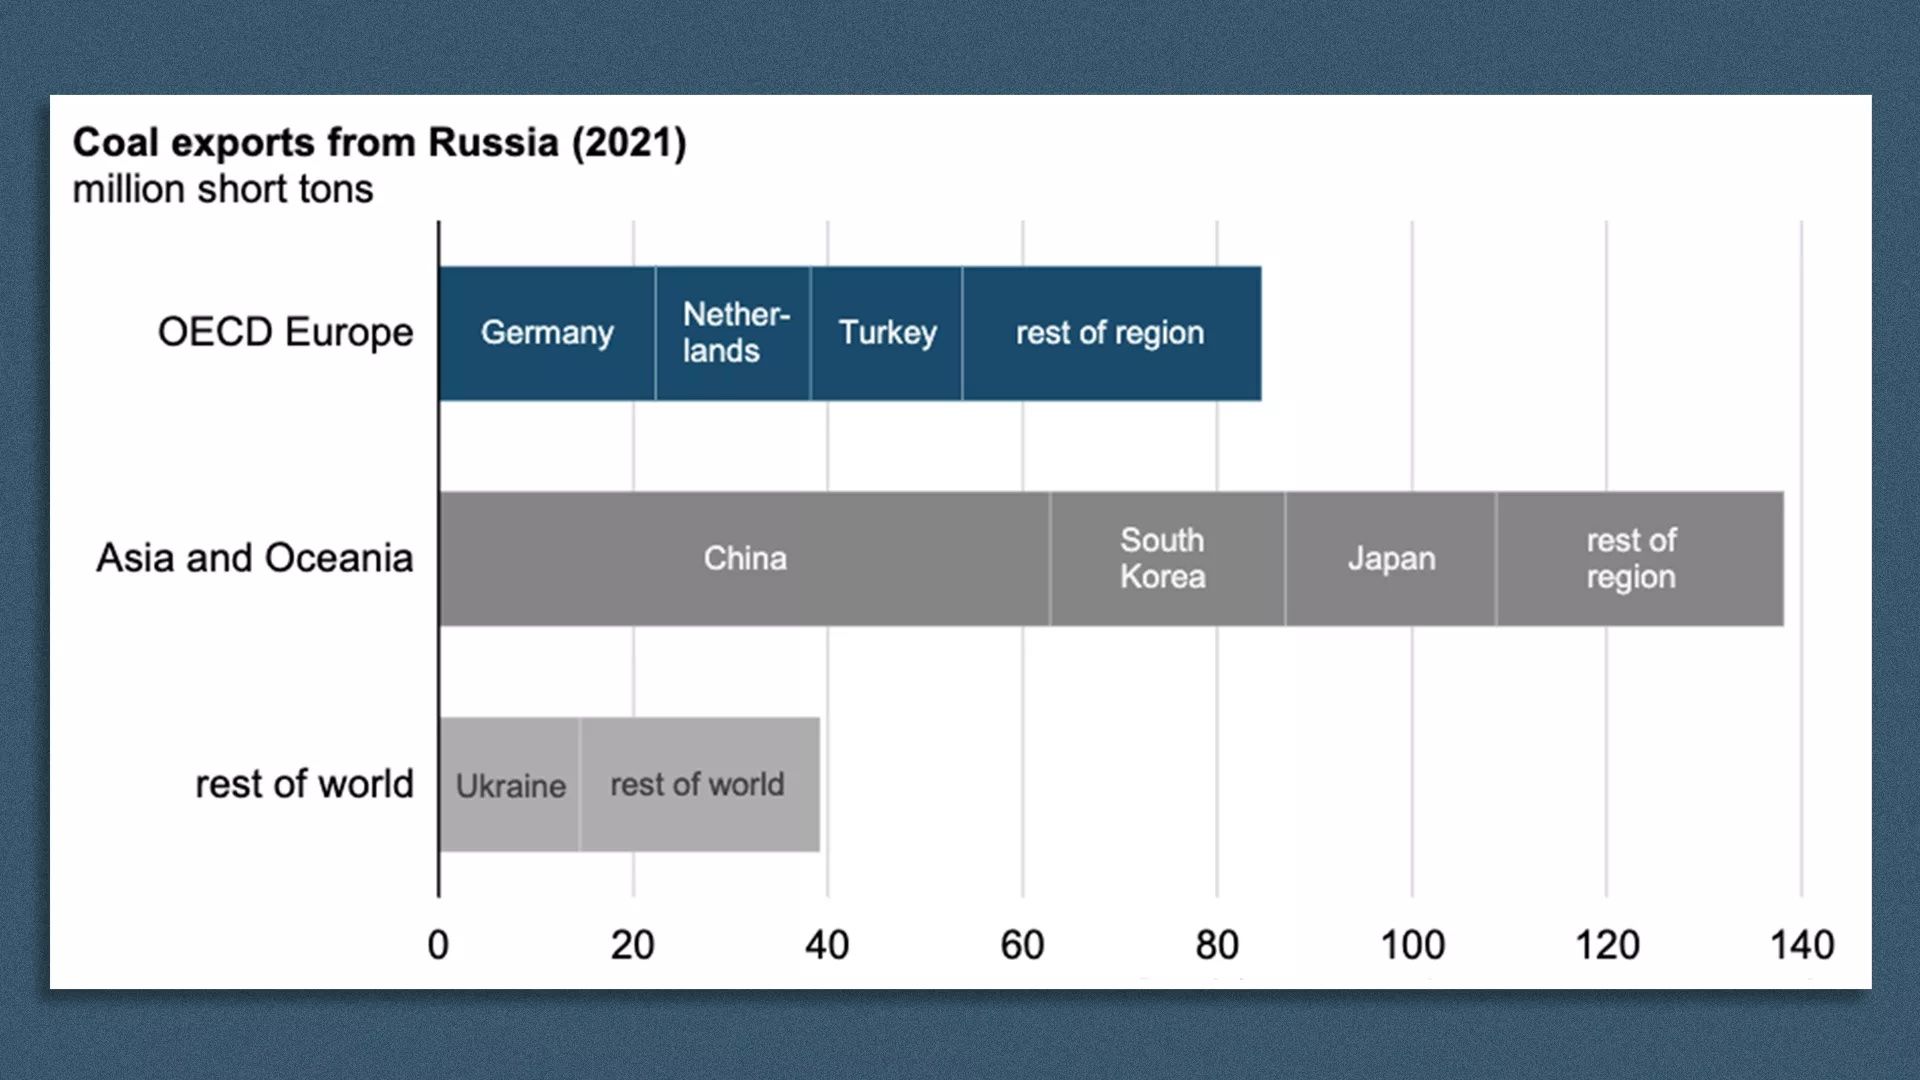 Screenshot of coal exports from Russia in 2021